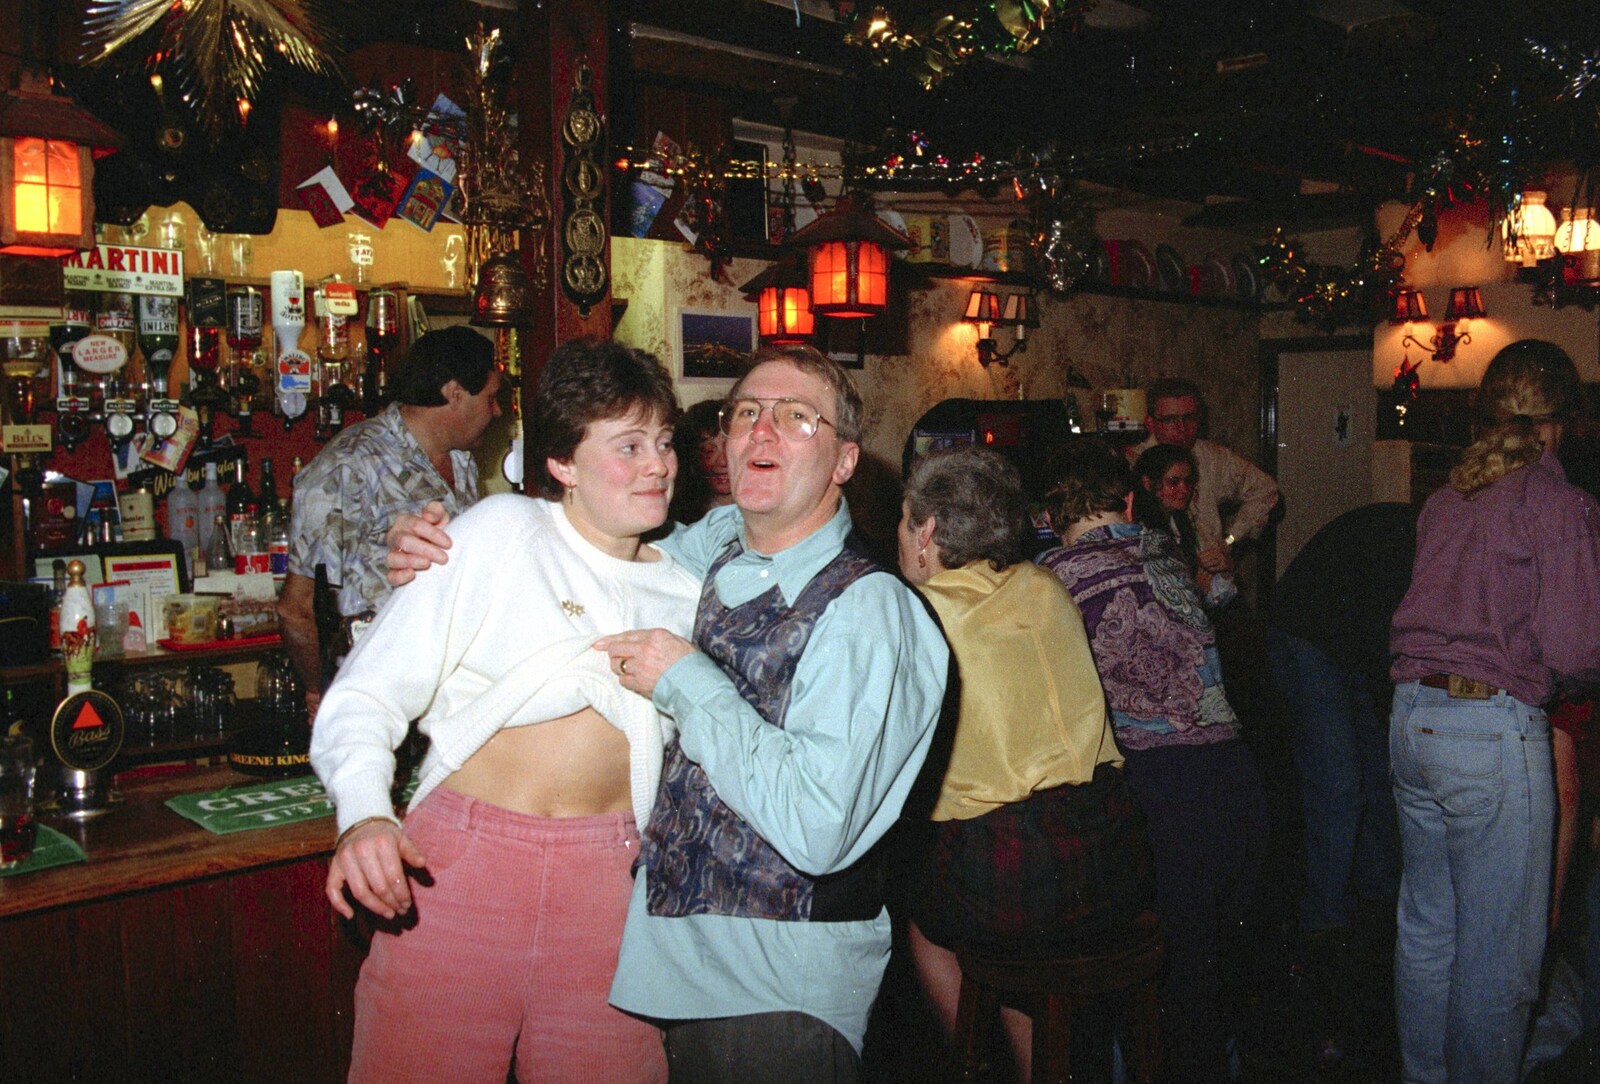 John Willy attemps to get Pippa's boobs out from New Year's Eve at the Swan Inn, Brome, Suffolk - 31st December 1994